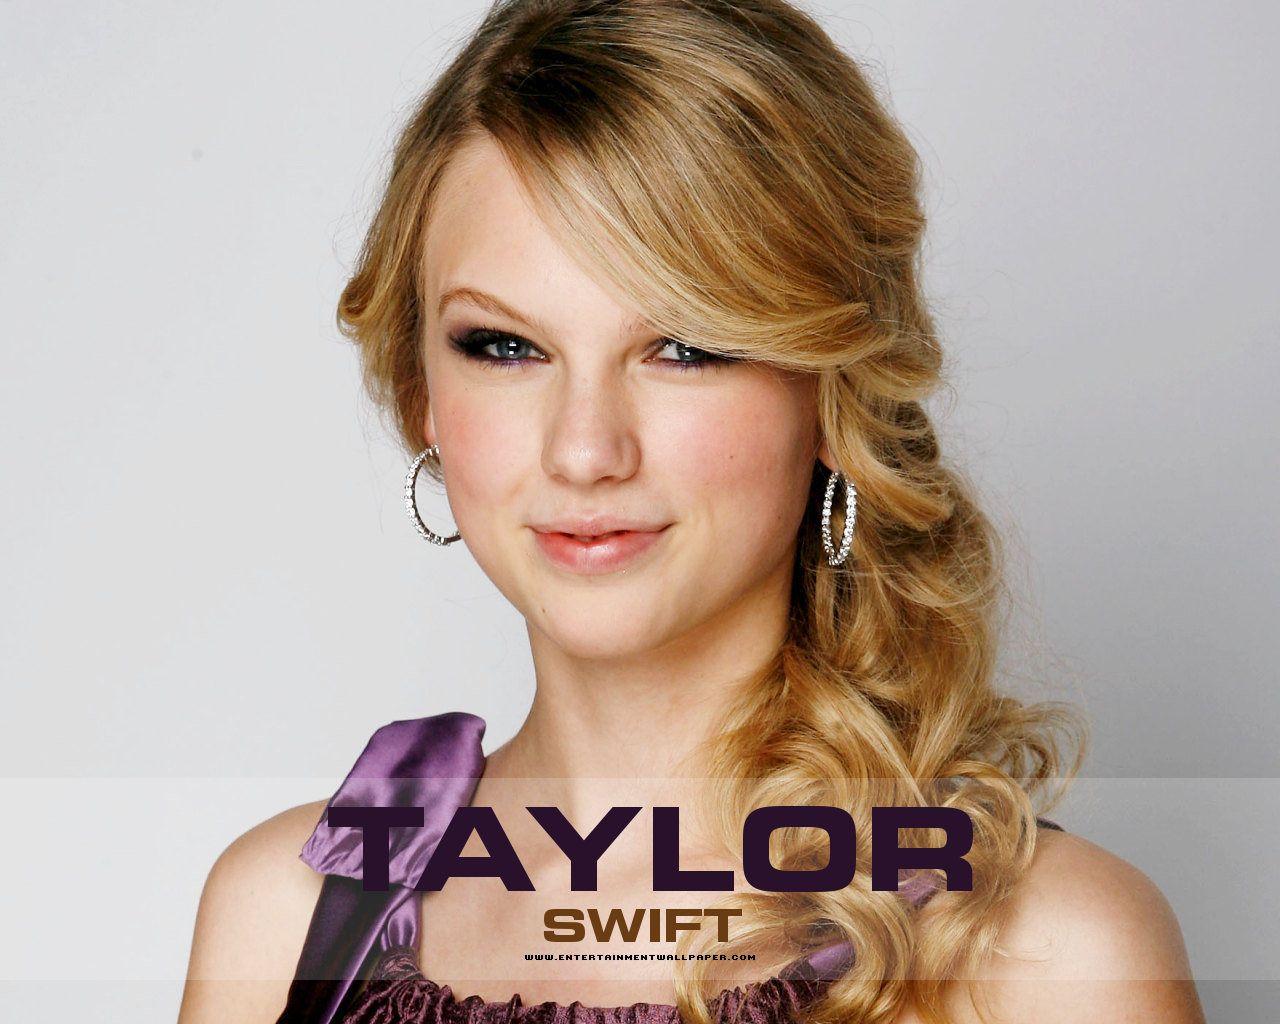 Taylor Swift. Taylor Swift ♥taylor. Places to Visit